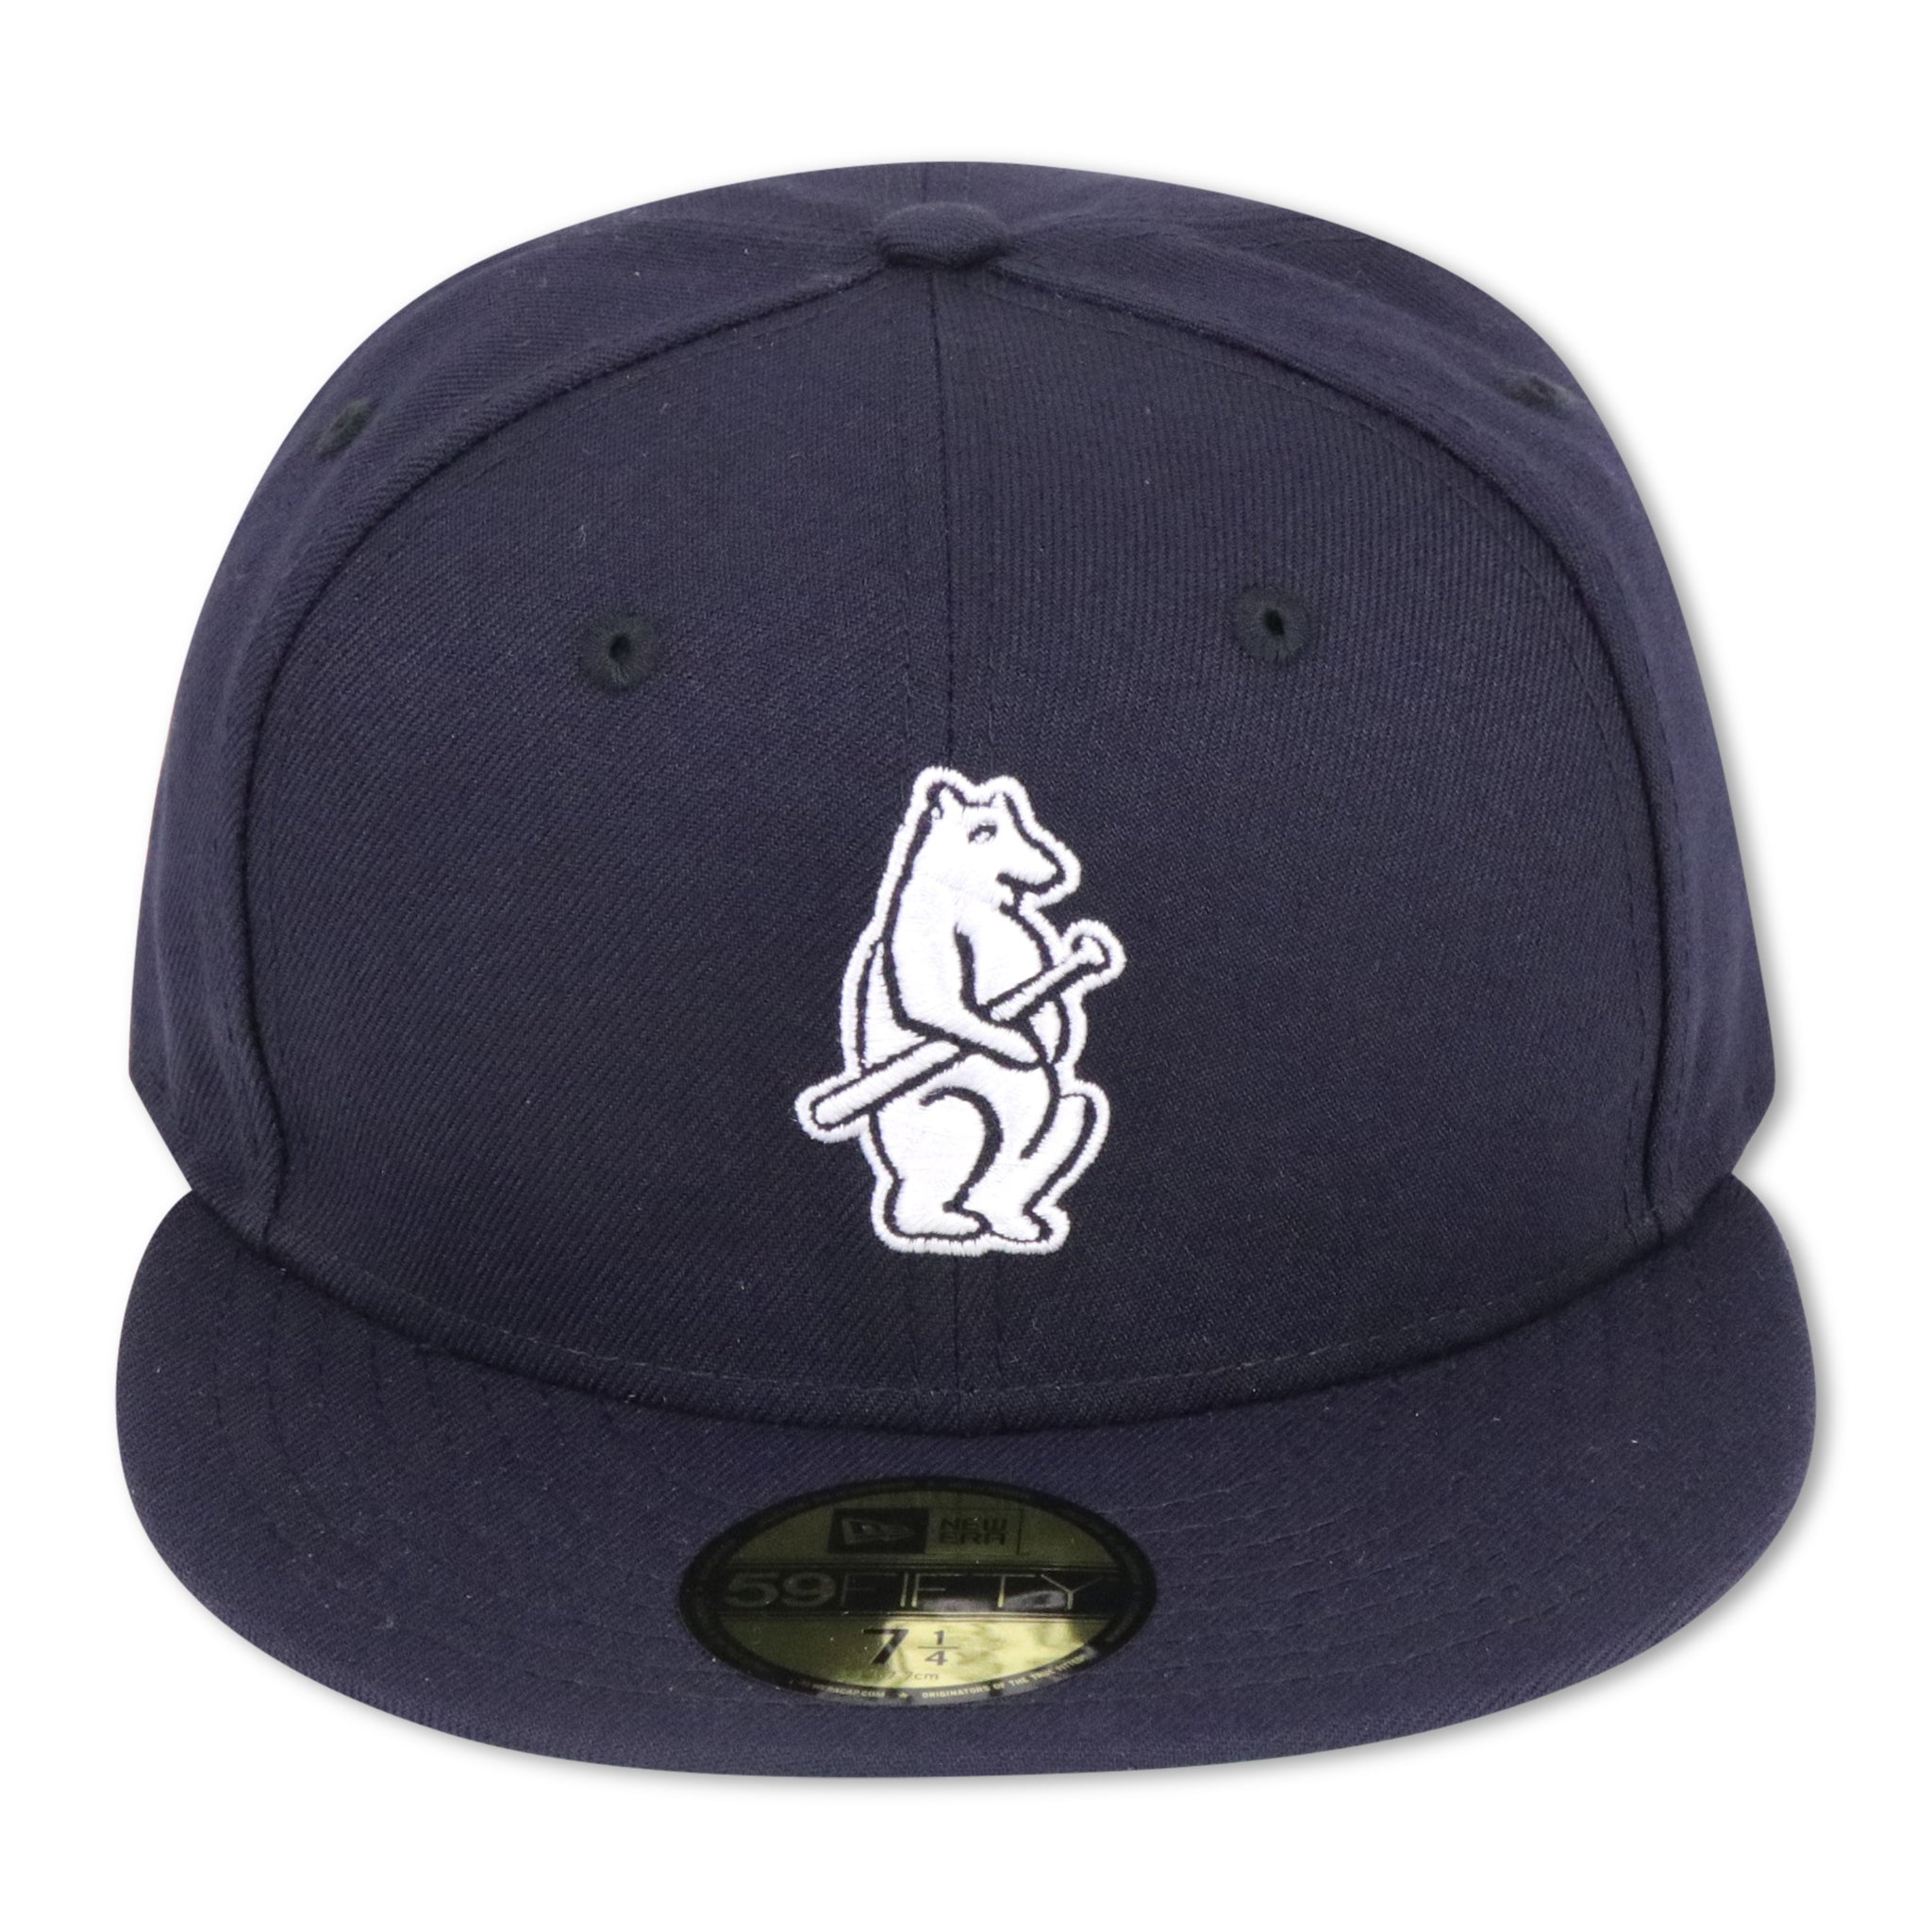 CHICAGO CUBS (1914) NEW ERA 59FIFTY FITTED (GREEN BOTTOM)